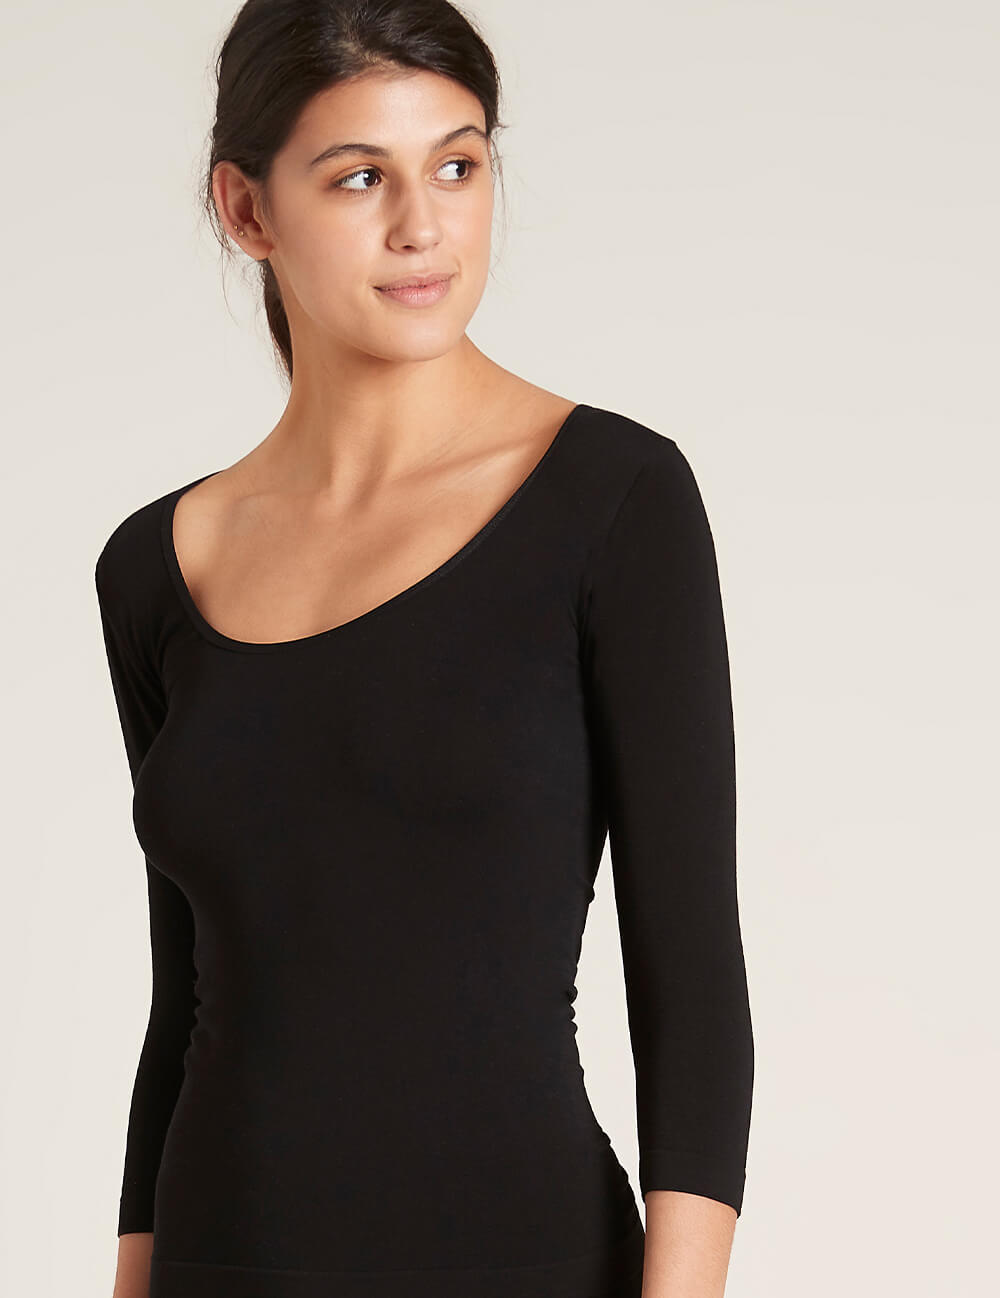 Boody Bamboo Women's Scoop Neck 3/4 Sleeve Shirt in Black Front View 3